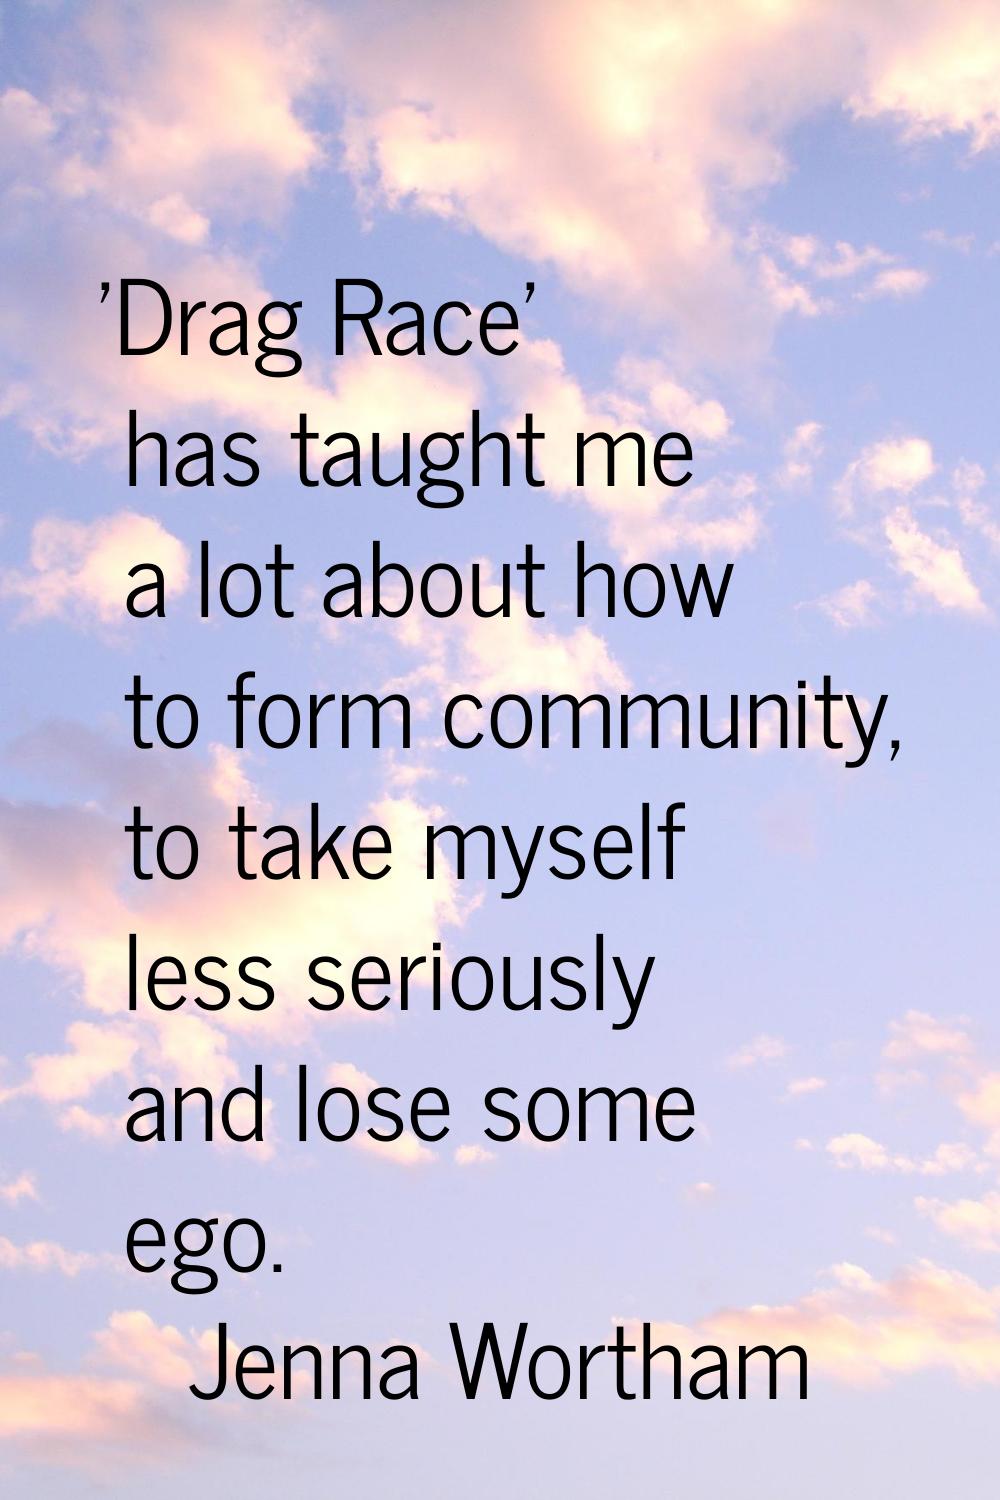 'Drag Race' has taught me a lot about how to form community, to take myself less seriously and lose